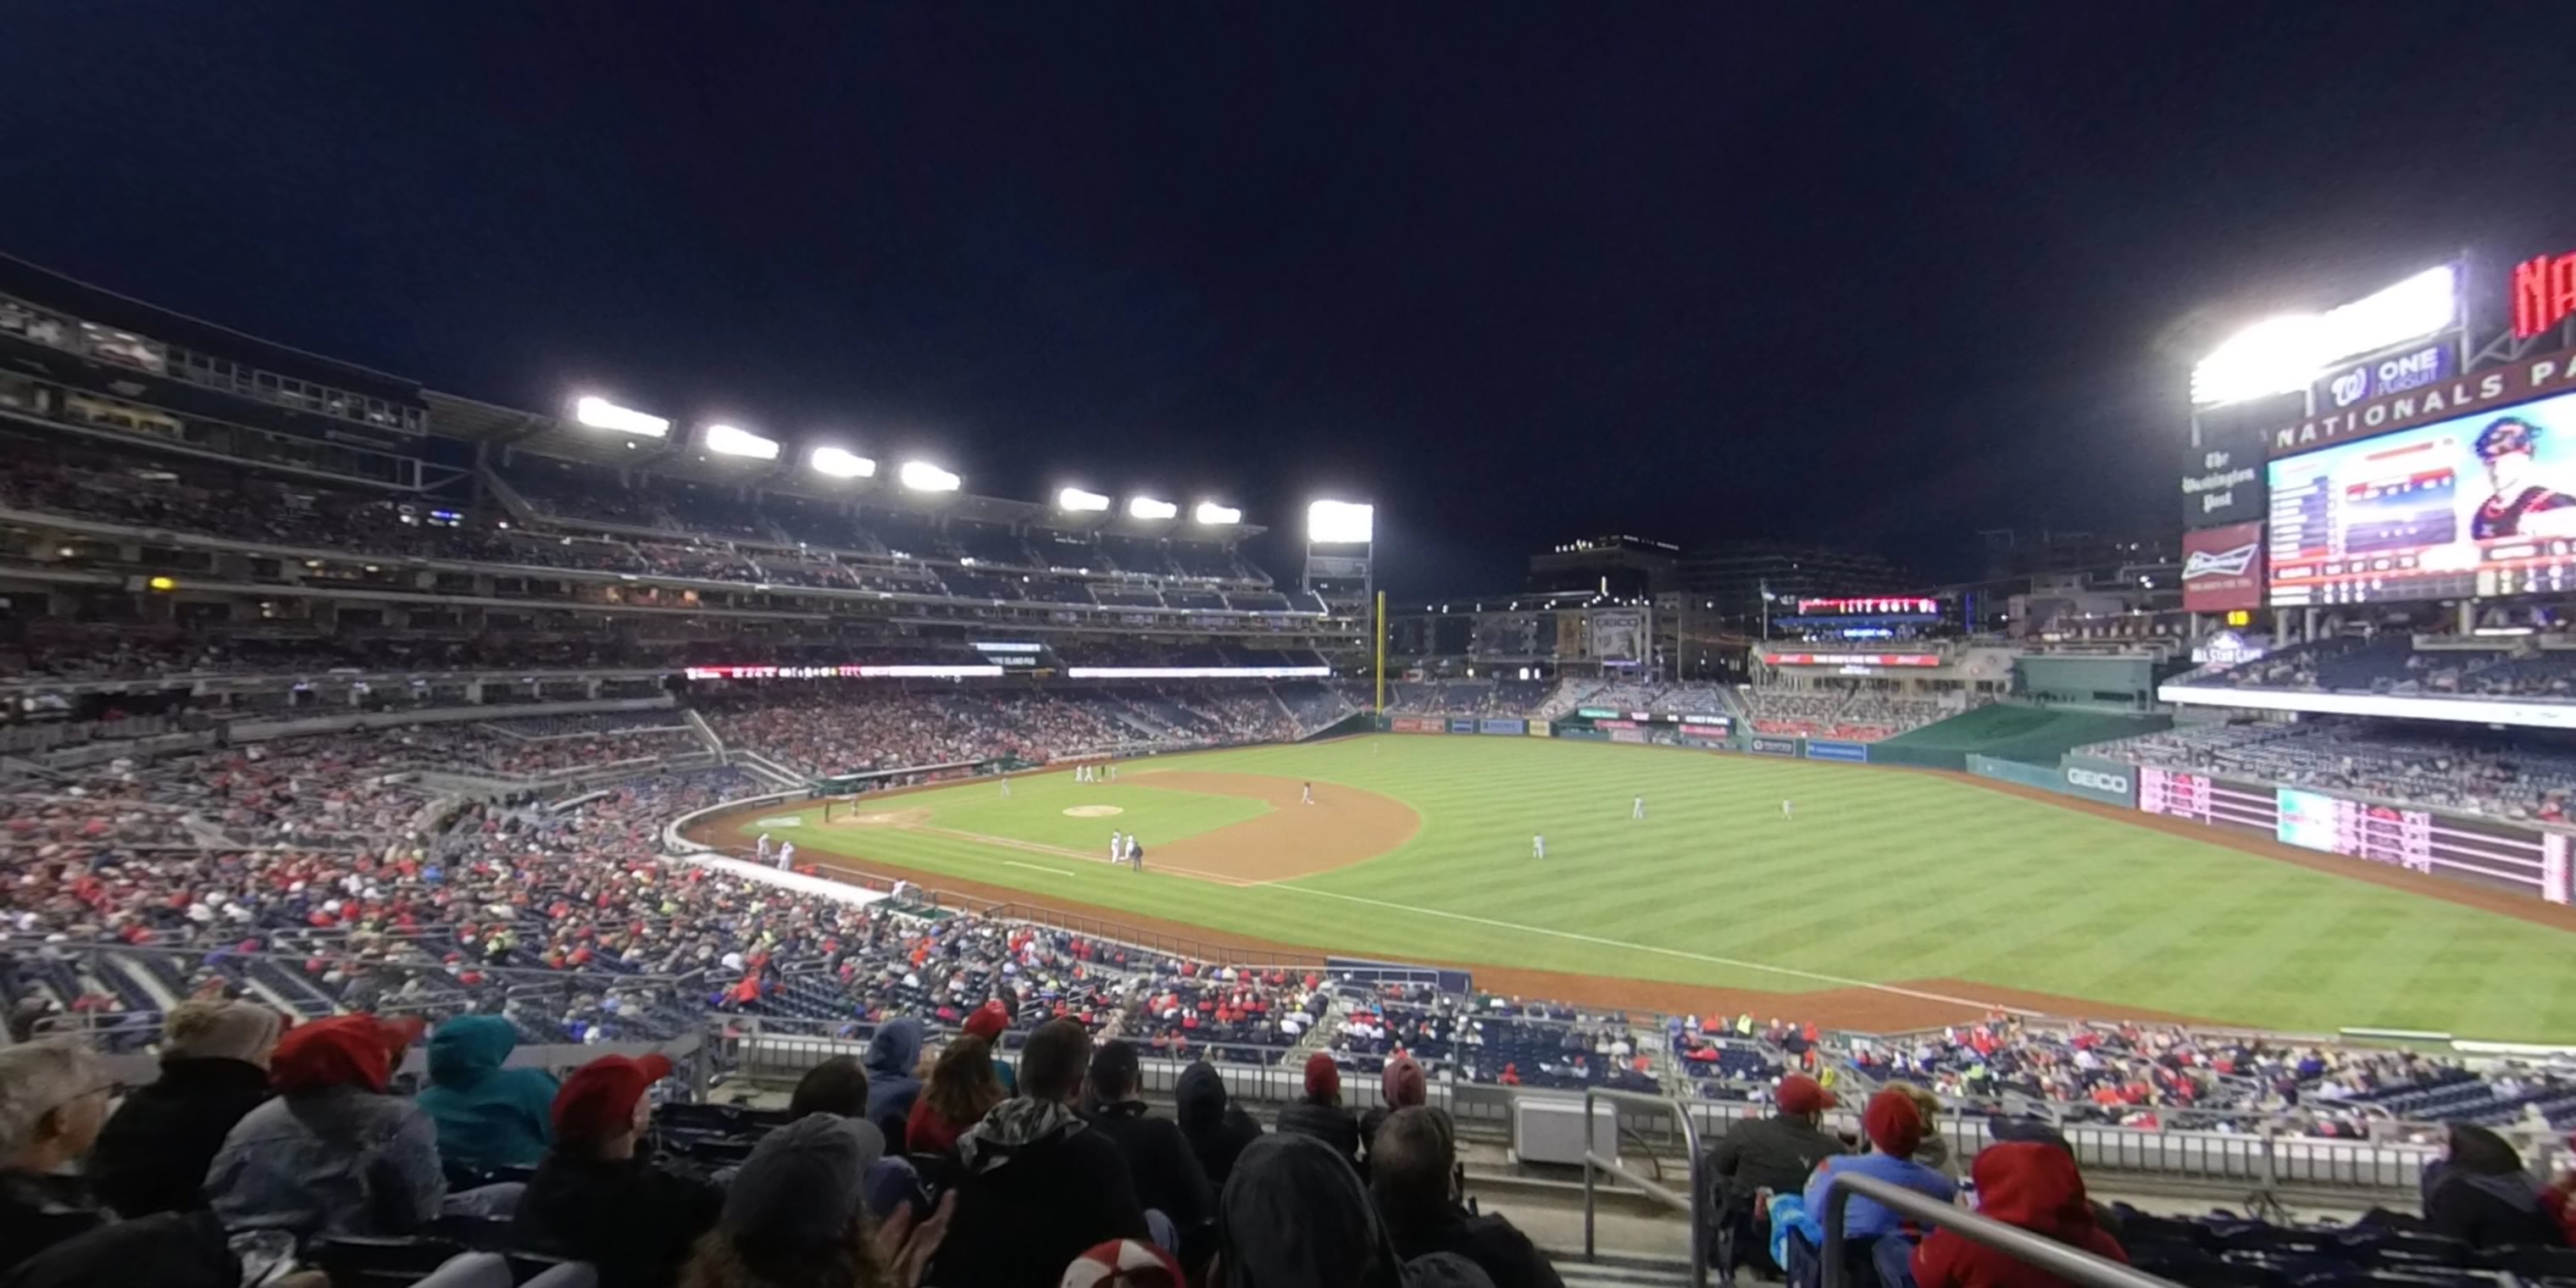 section 223 panoramic seat view  for baseball - nationals park